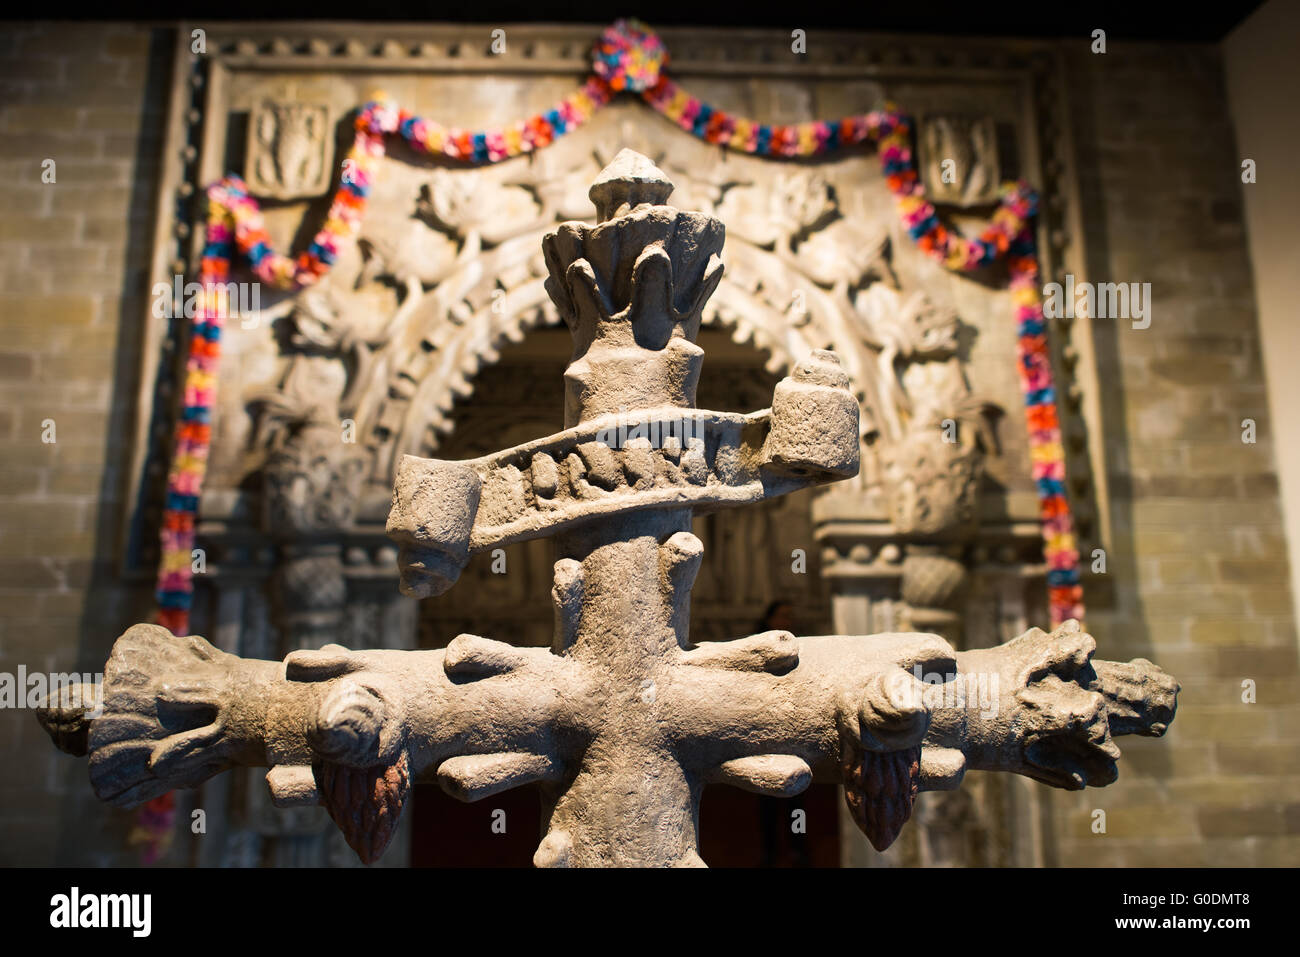 MEXICO CITY, MEXICO--The National Museum of Anthropology showcases  significant archaeological and anthropological artifacts from the Mexico's pre-Columbian heritage, including its Aztec and indiginous cultures. Stock Photo